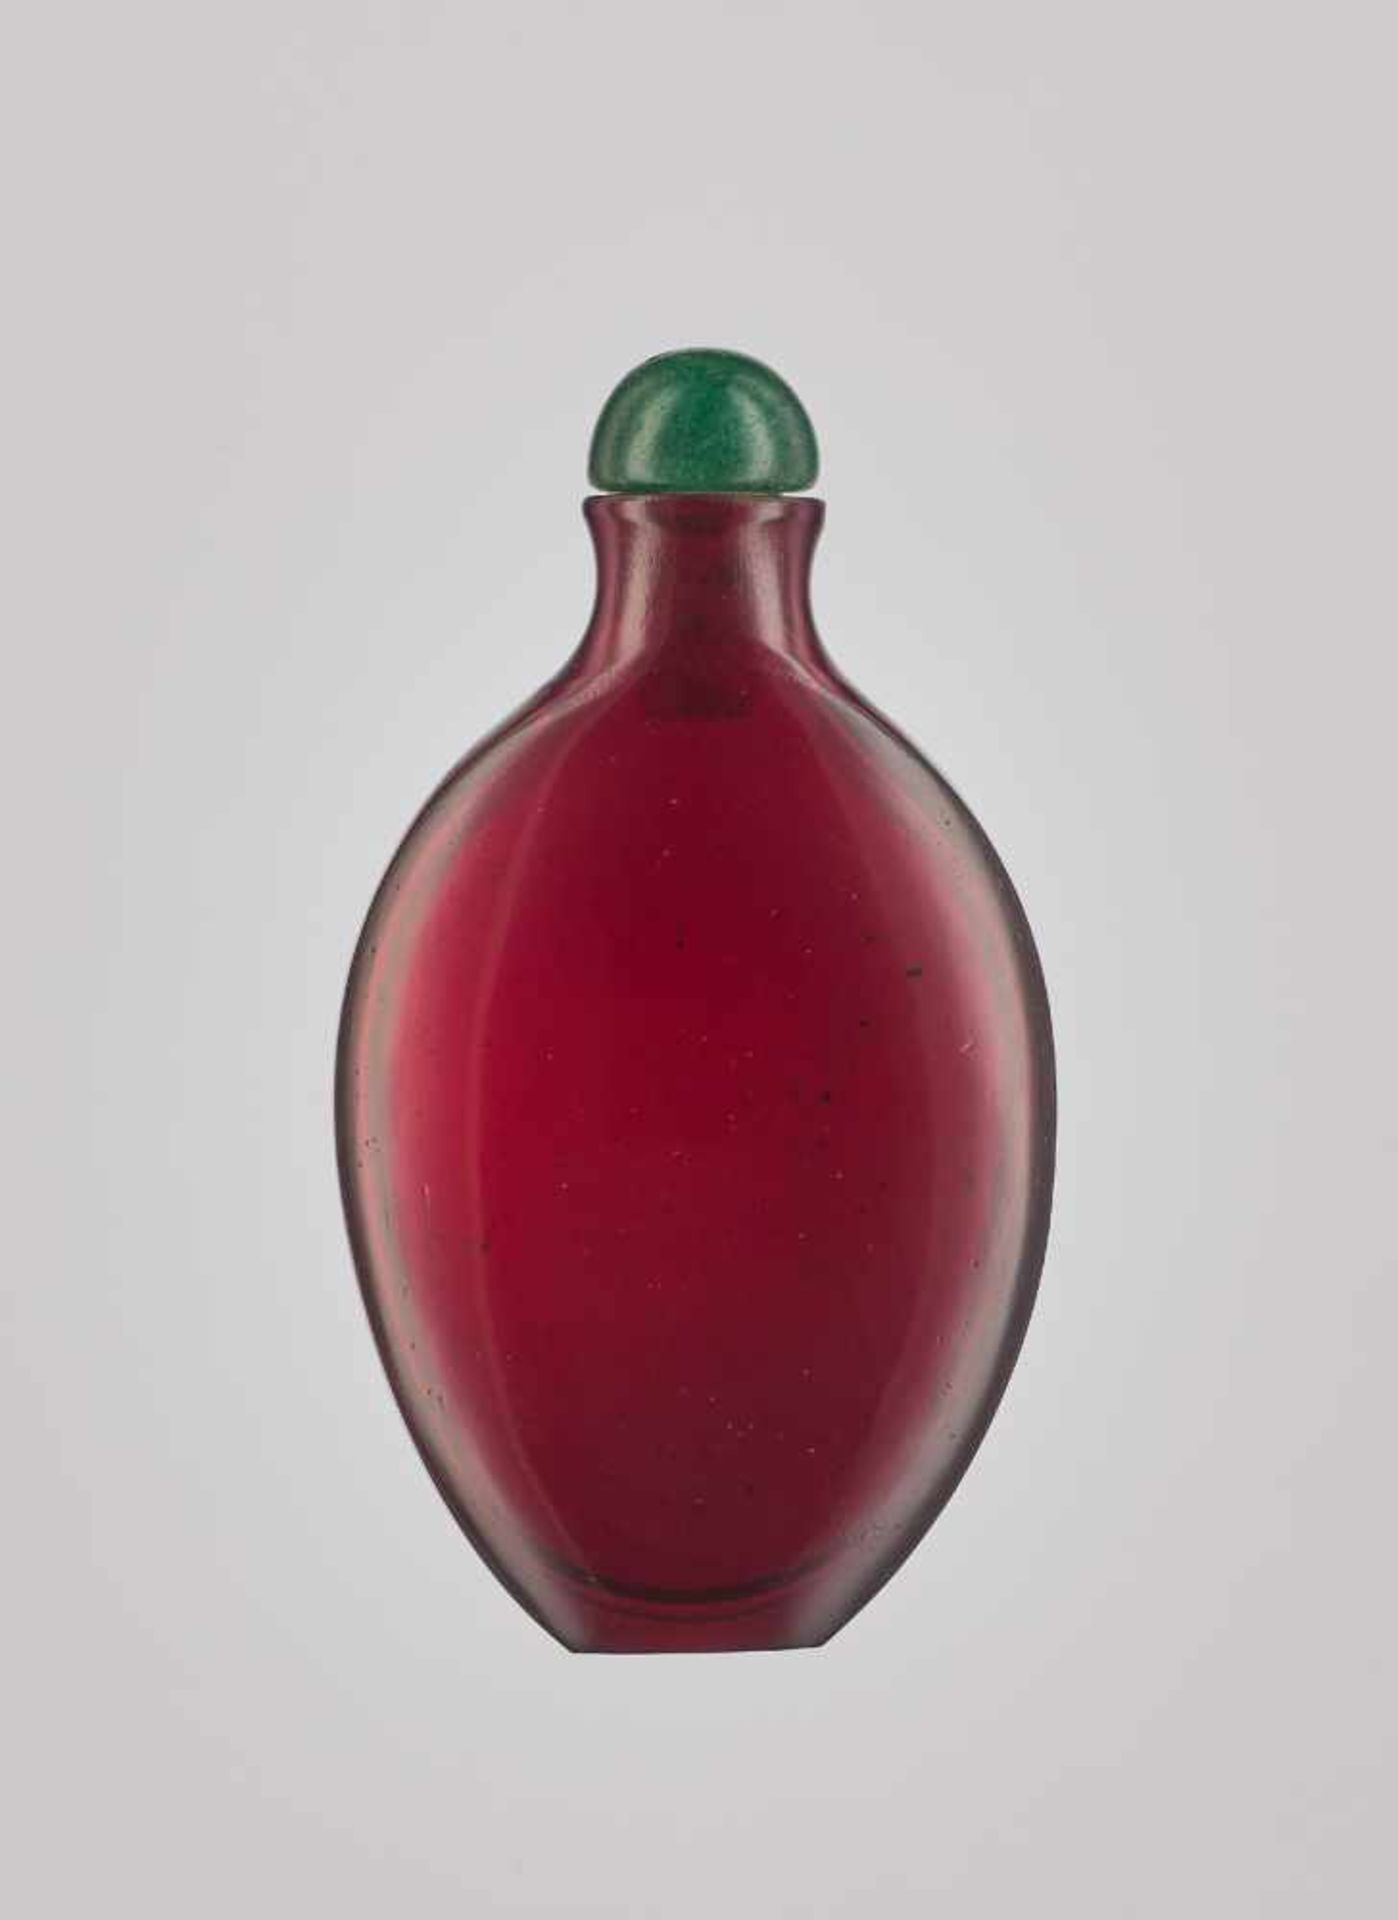 A PLAIN FACETED RUBY-RED GLASS SNUFF BOTTLE, QING DYNASTY Plain glass body with only few small